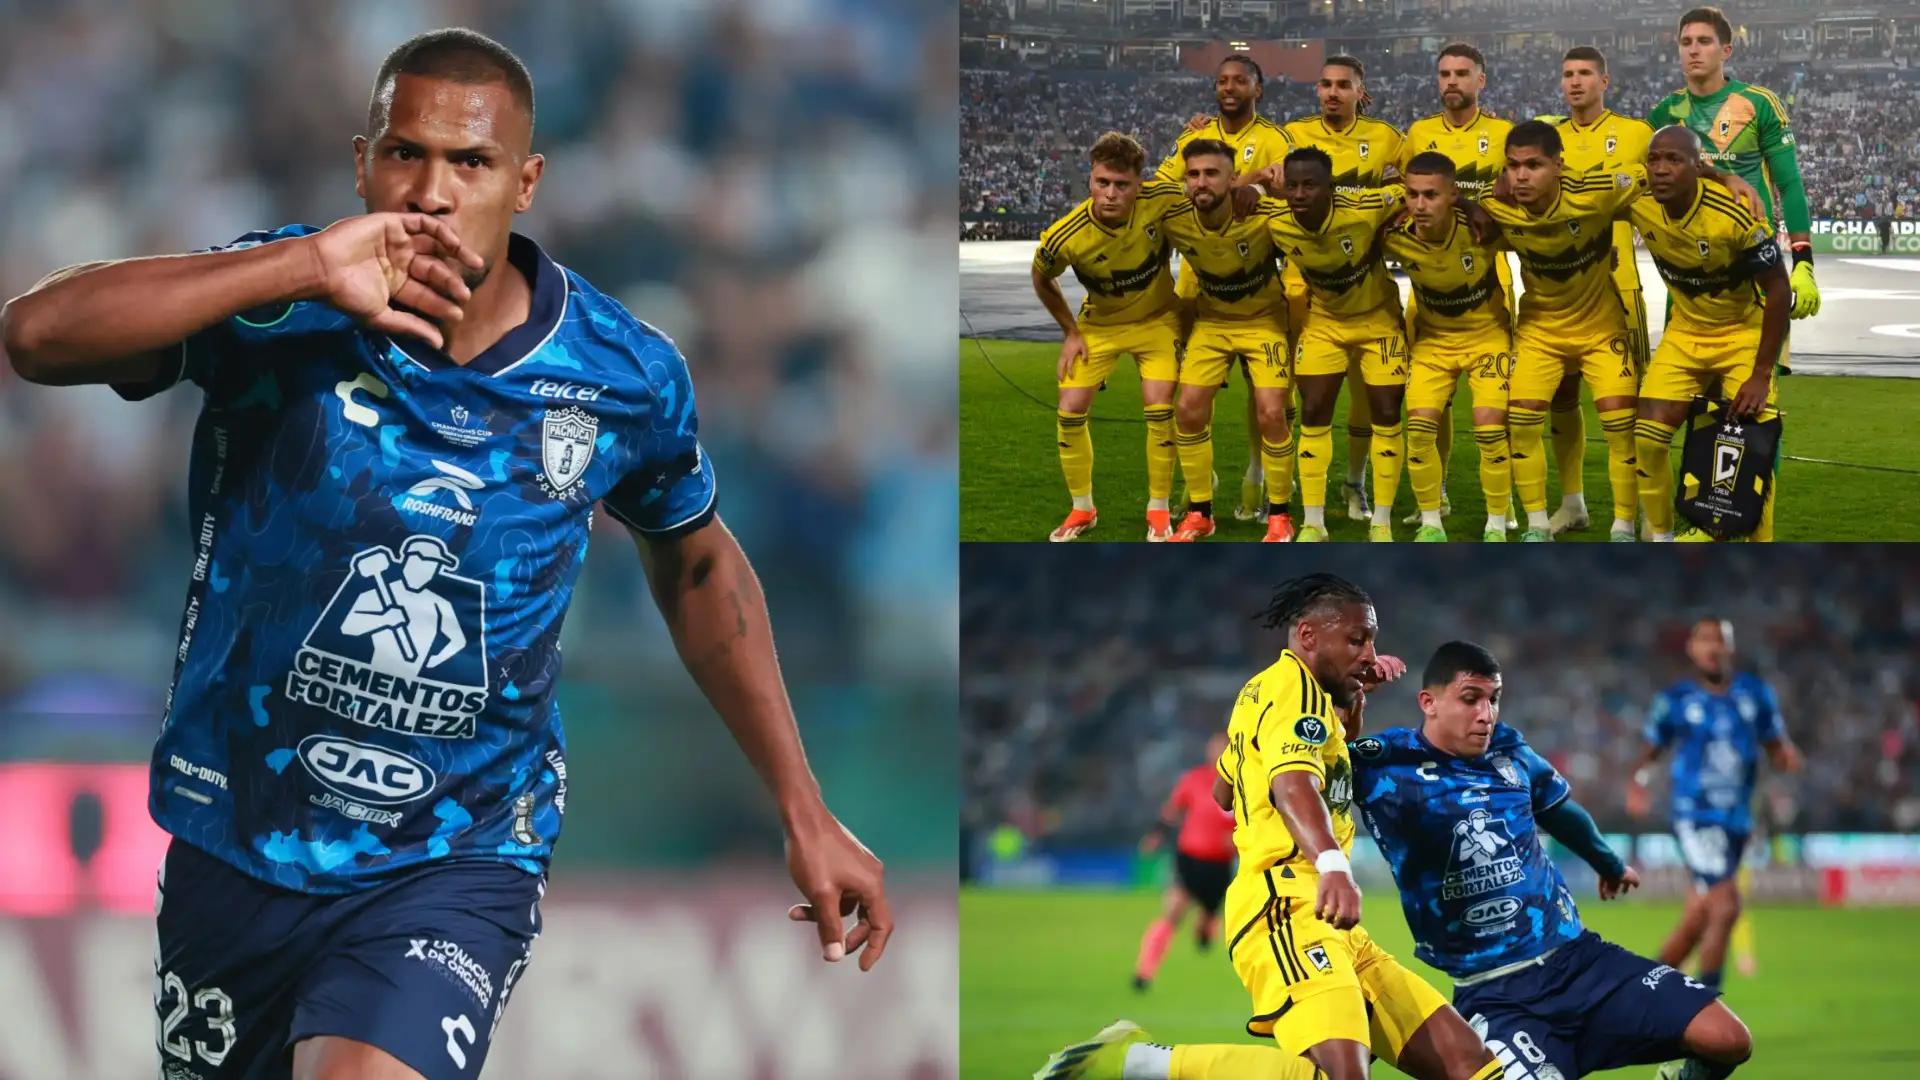 Columbus Crew blanked as Salomon Rondon's brace leads Pachuca to CONCACAF Champions Cup title